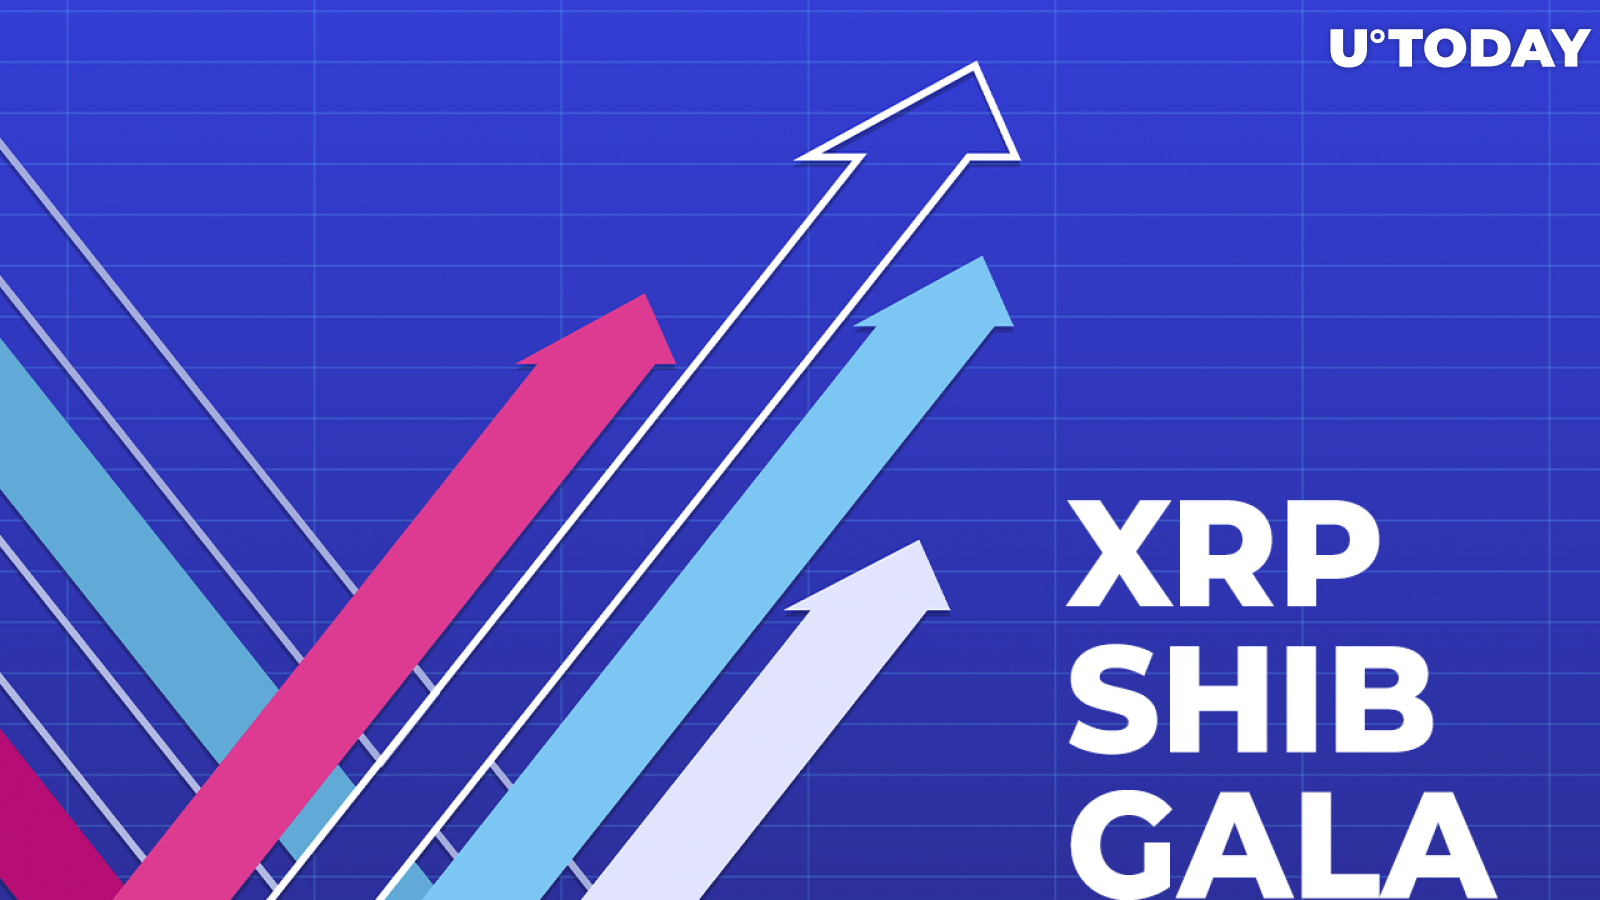 Altcoins Like XRP, SHIB and GALA Made Up Their Losses as Market Rebounded